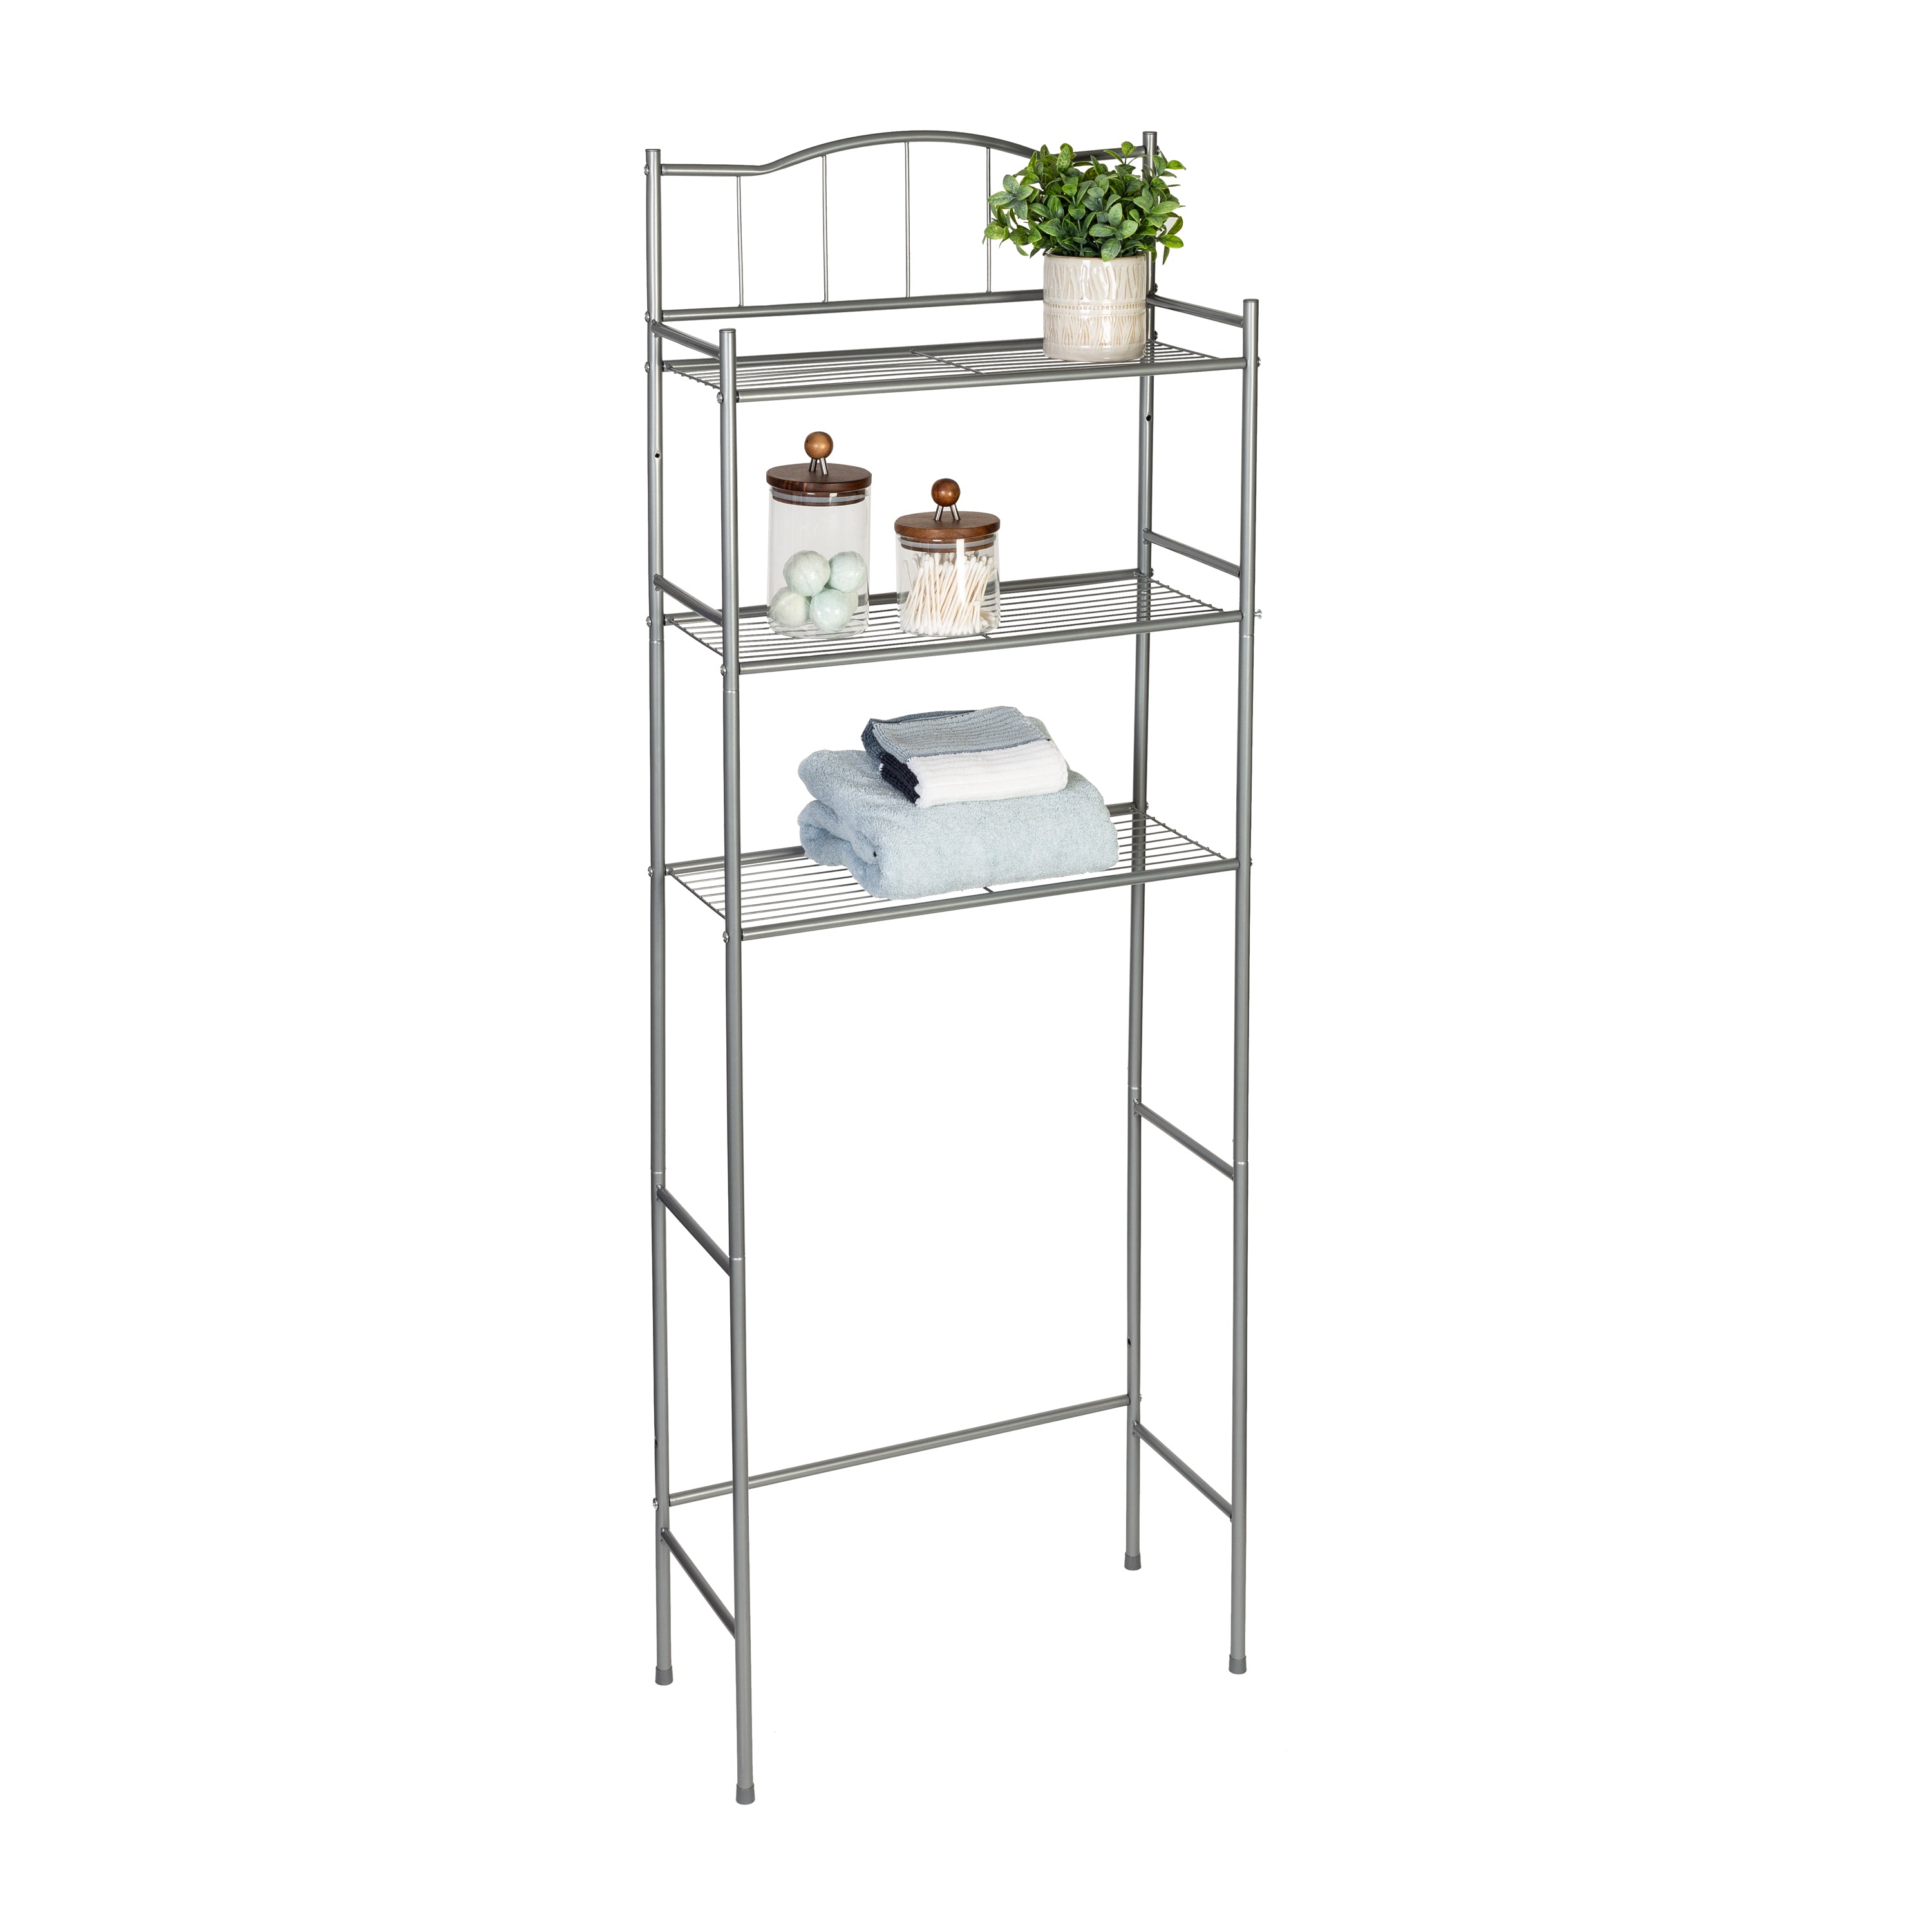 Honey Can Do 3-Shelf Over-the-Toilet Space Saver, Satin Nickel